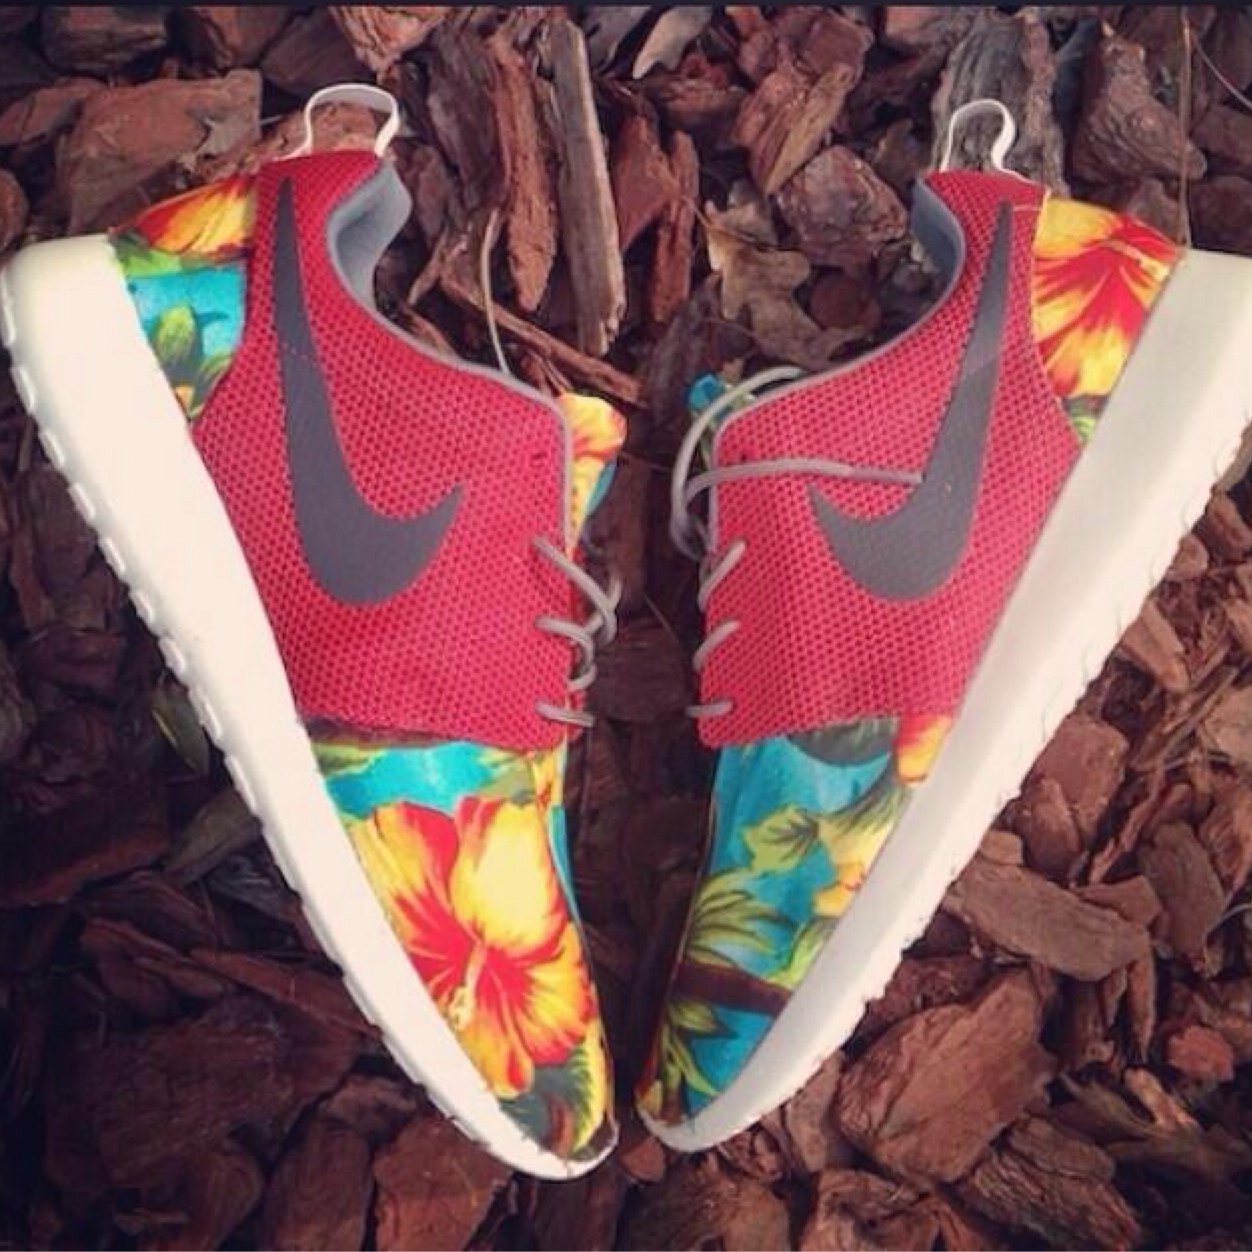 Giving away brand new pairs of Nike Roshe Runs. The winners will be followed and messaged for shipping information.